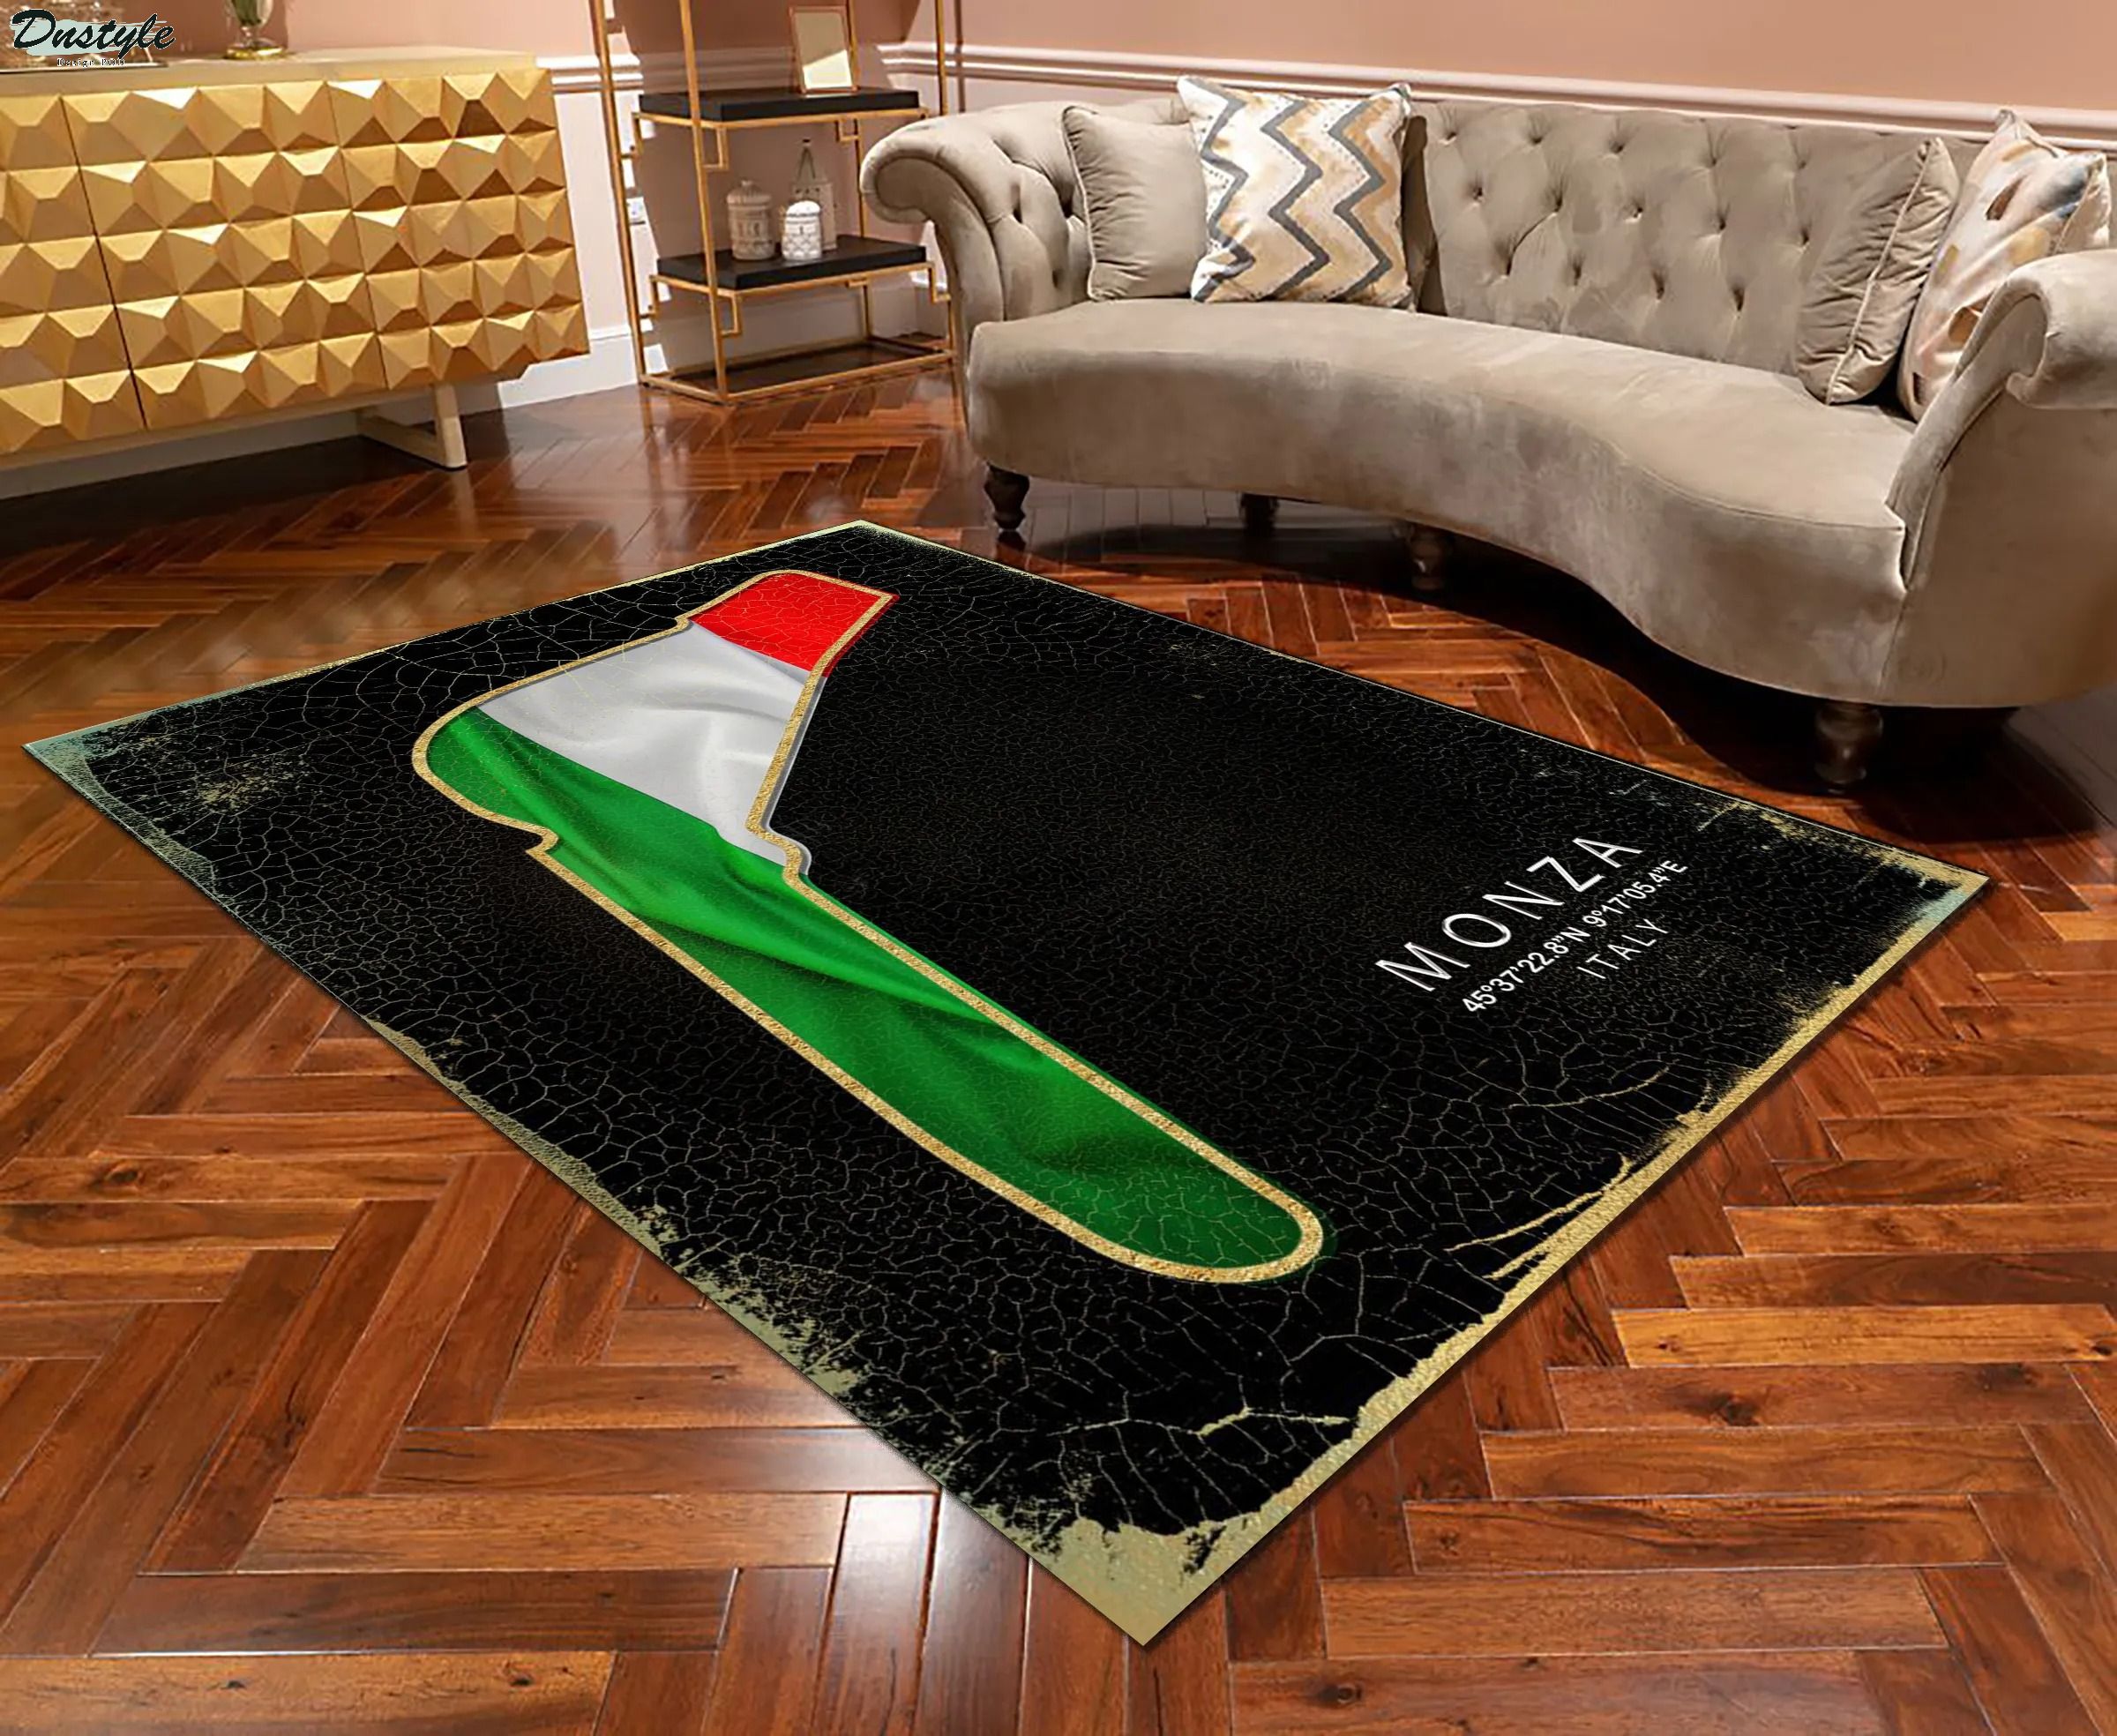 Monza italy f1 track rug 1